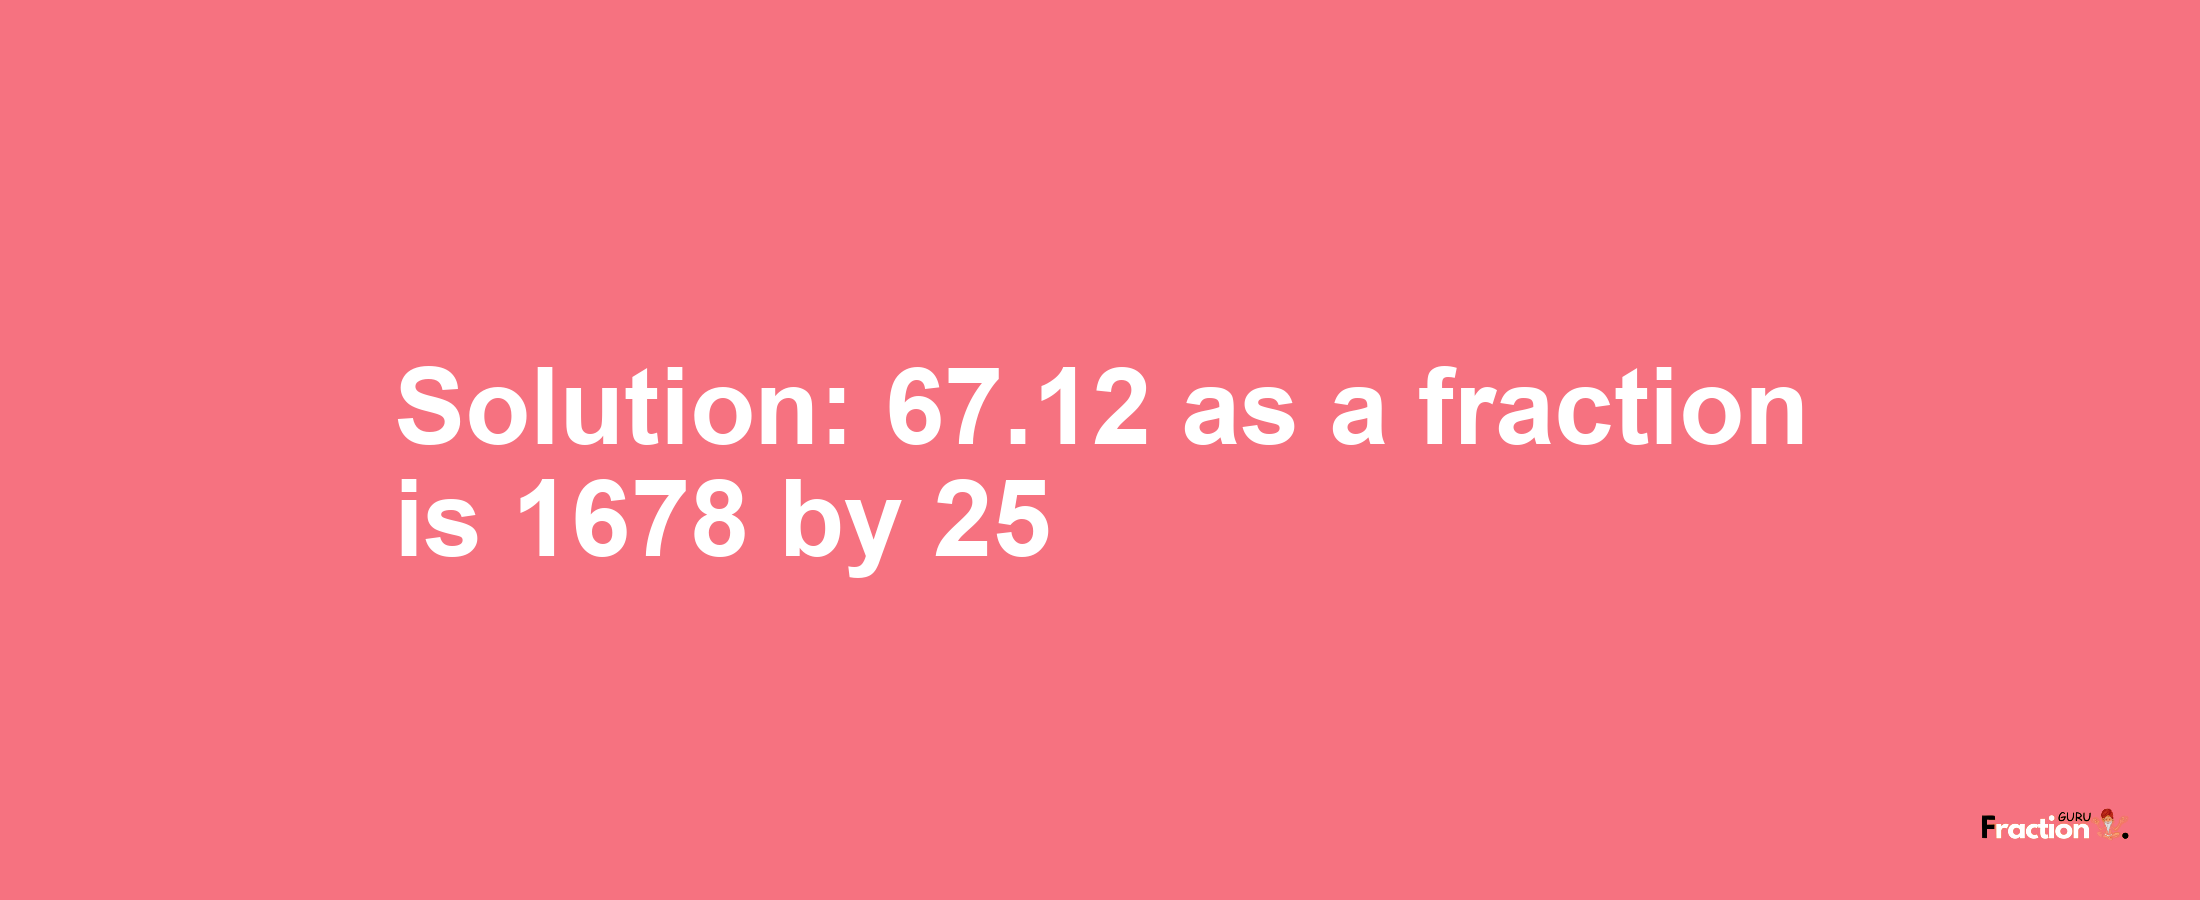 Solution:67.12 as a fraction is 1678/25